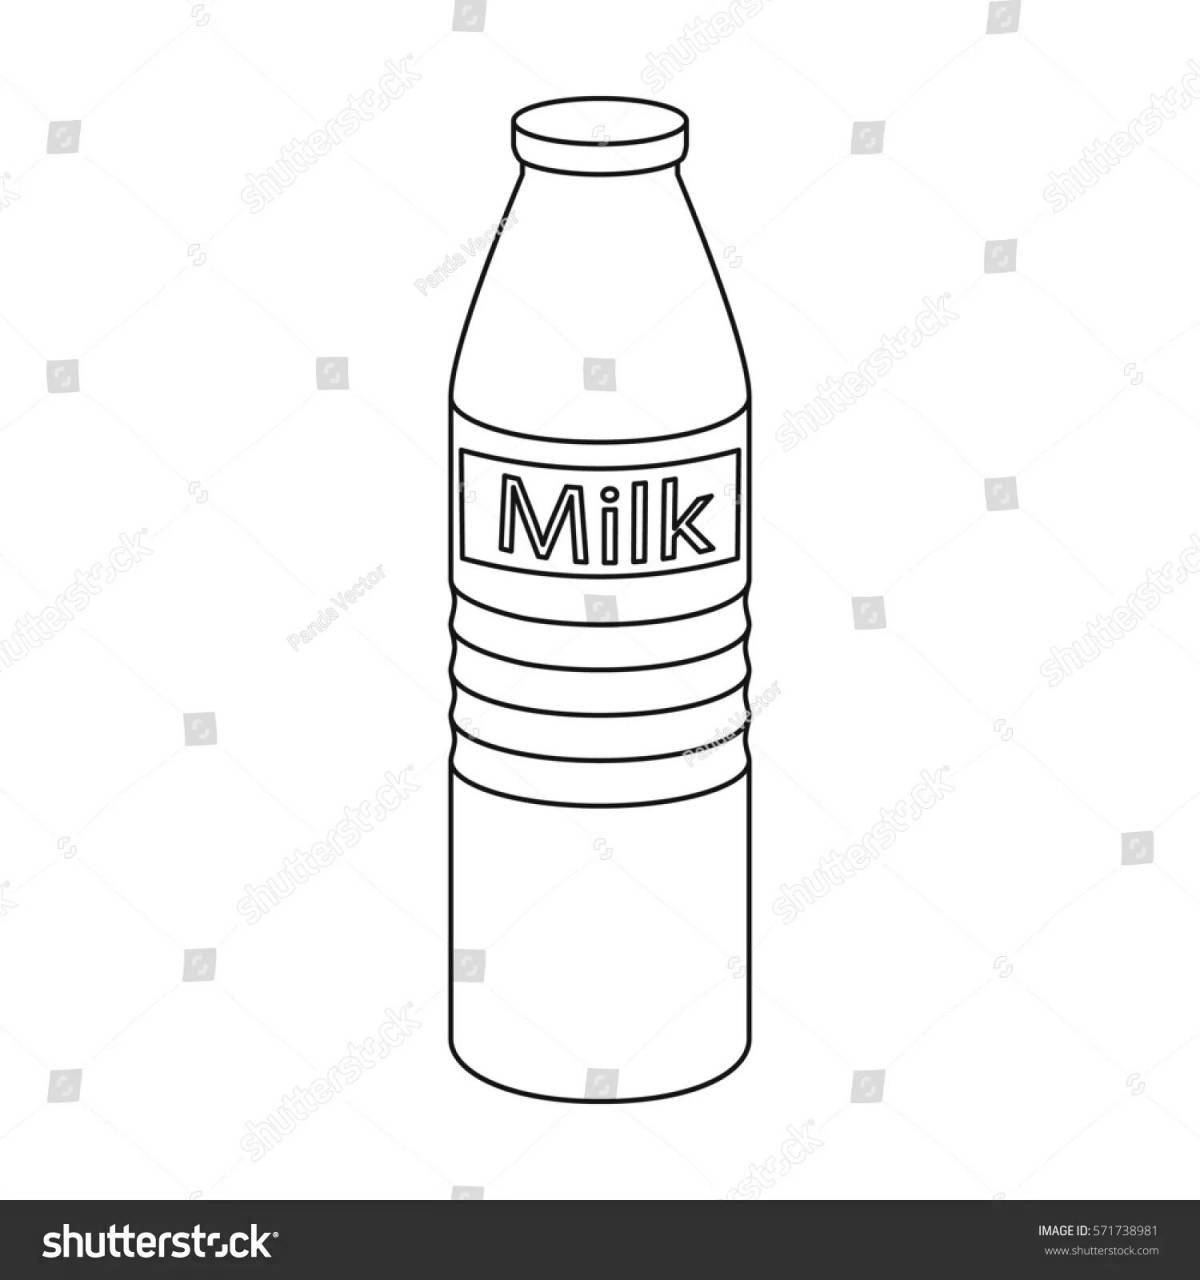 Coloring page happy bottle of milk